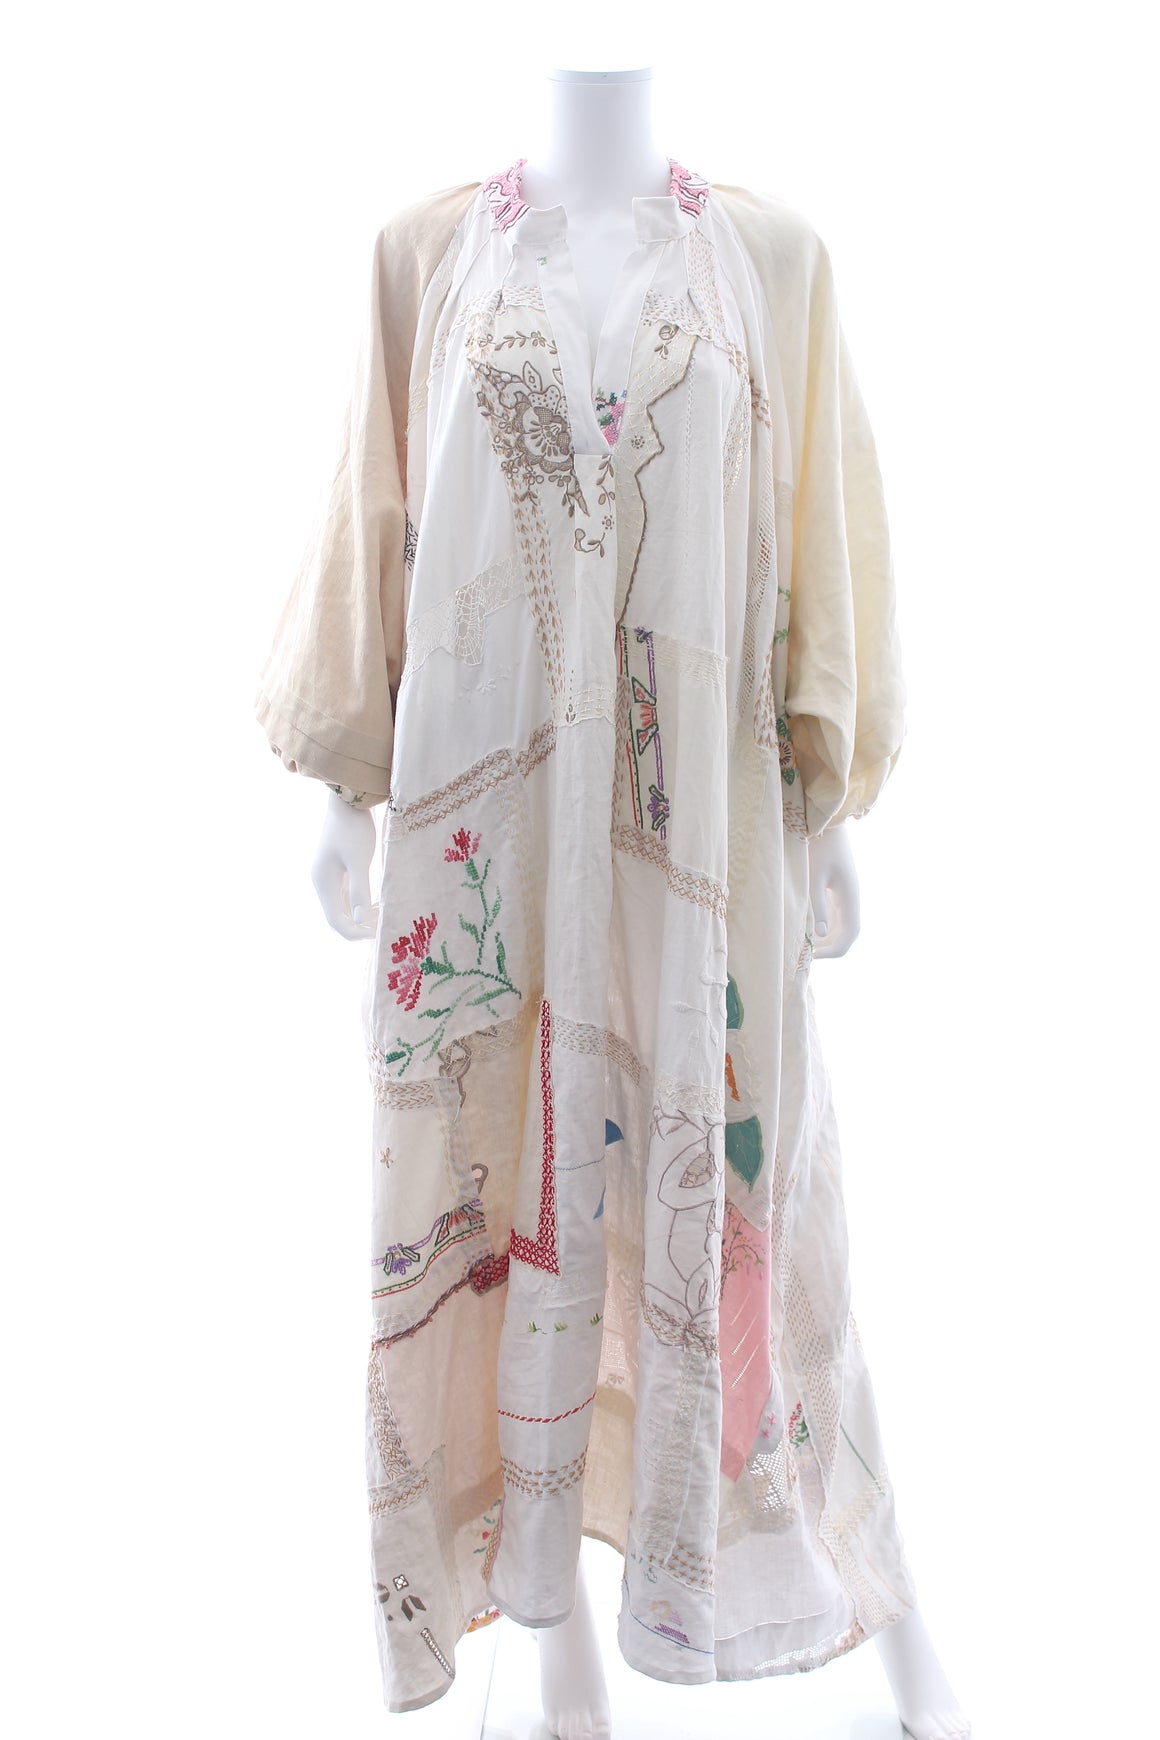 By Walid 1920s Embroidered Linen Doris Dress